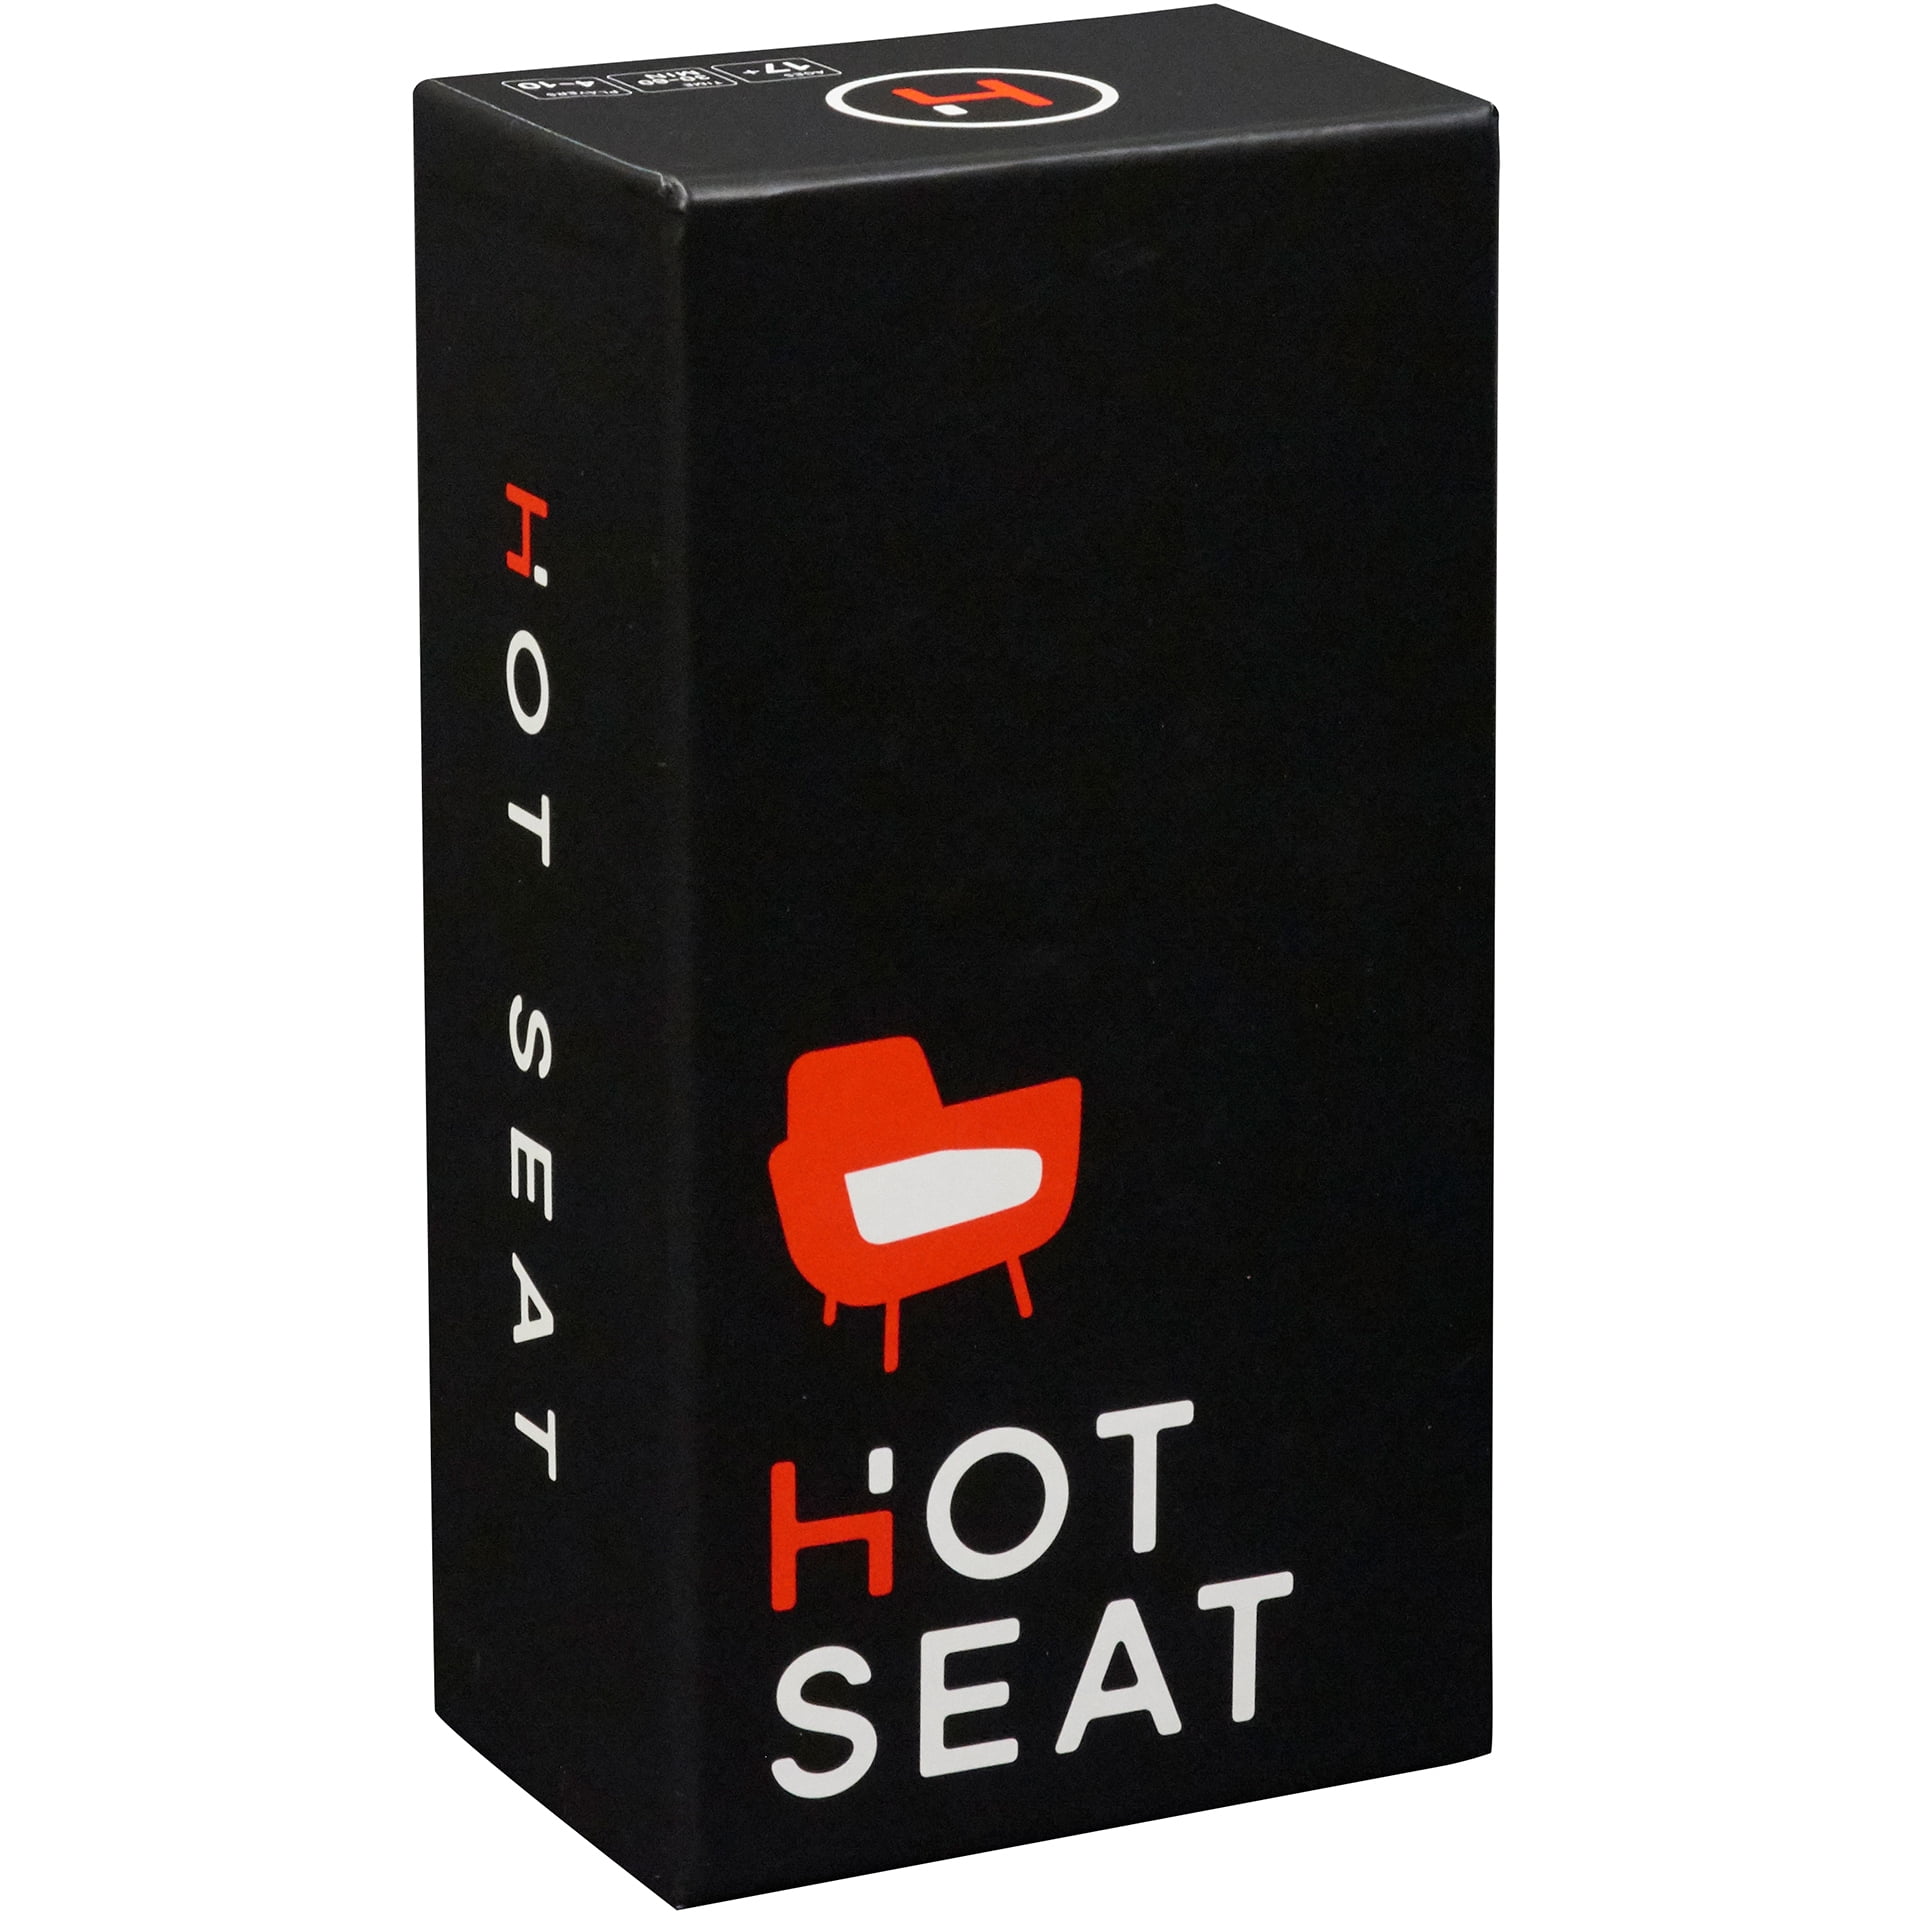 NSFW Expansion for sale online Adult Card Game Hot Seat 